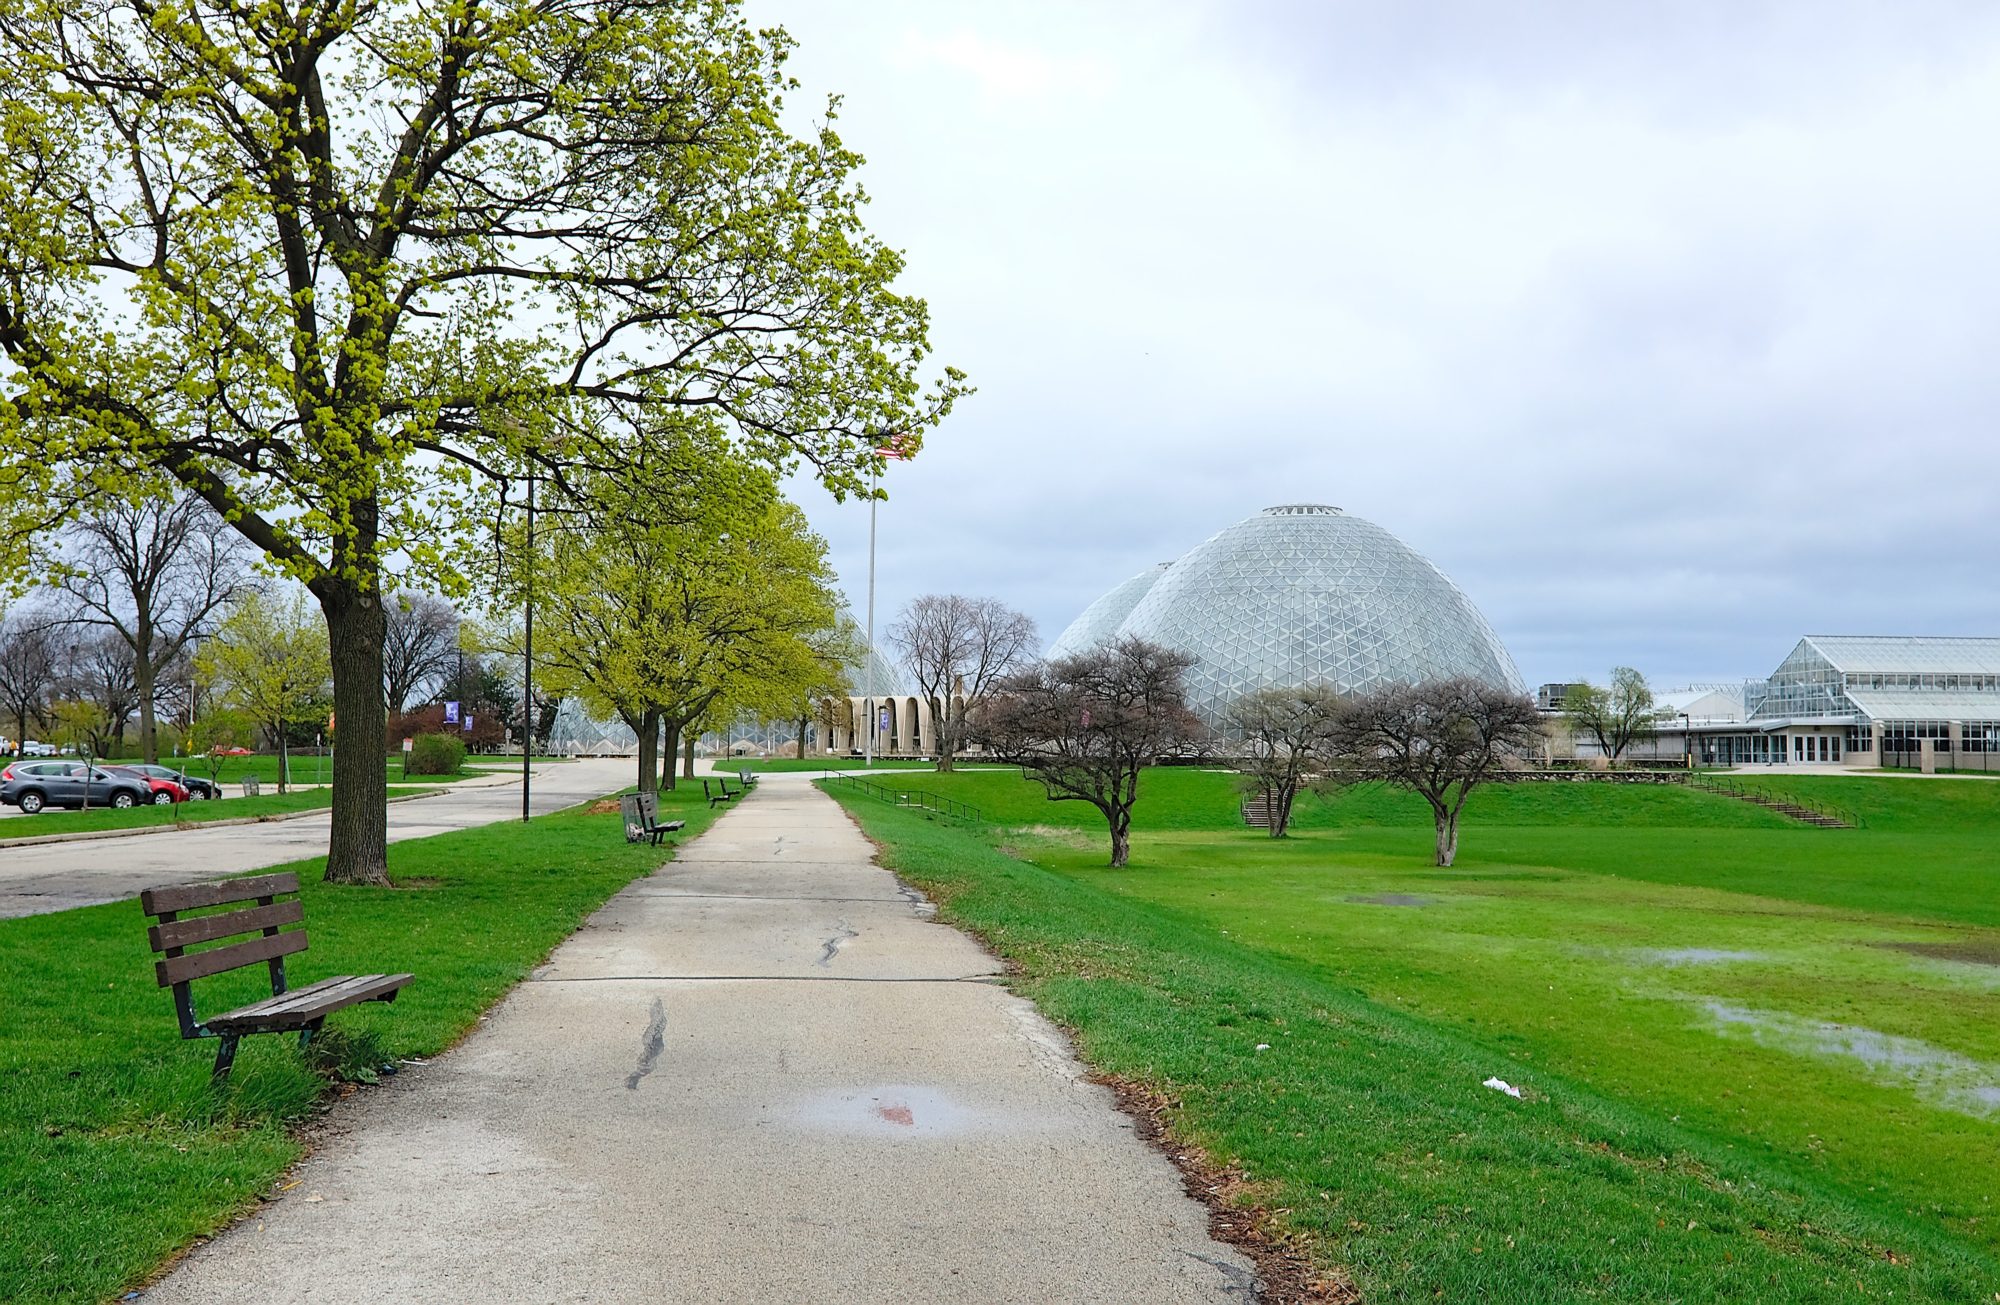 A view of the Mitchell Park Domes from afar